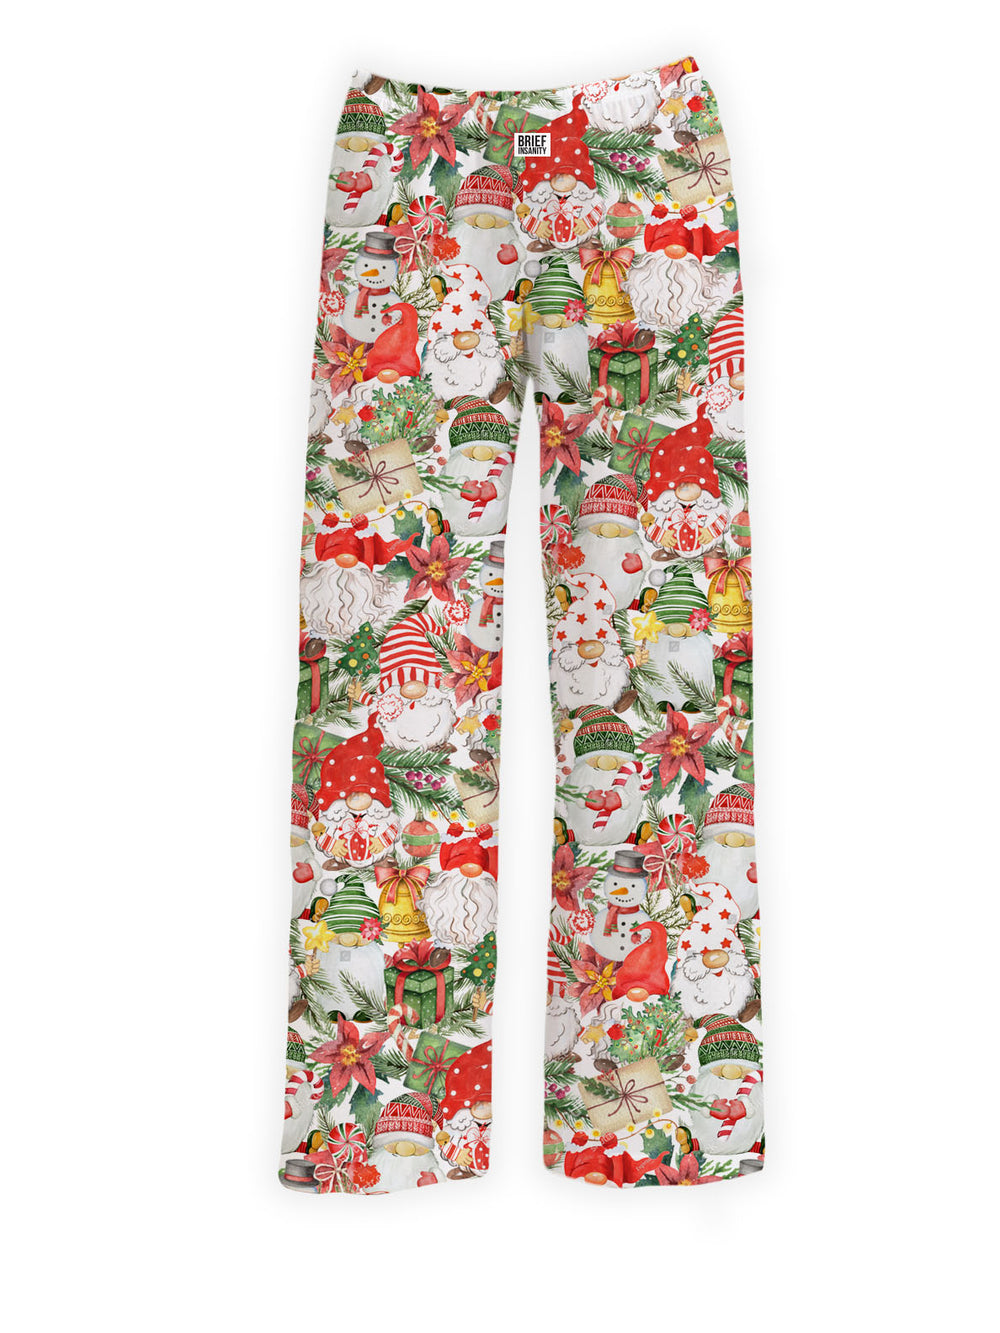 Dale's Exclusive Holiday Gnome Lounge Pants